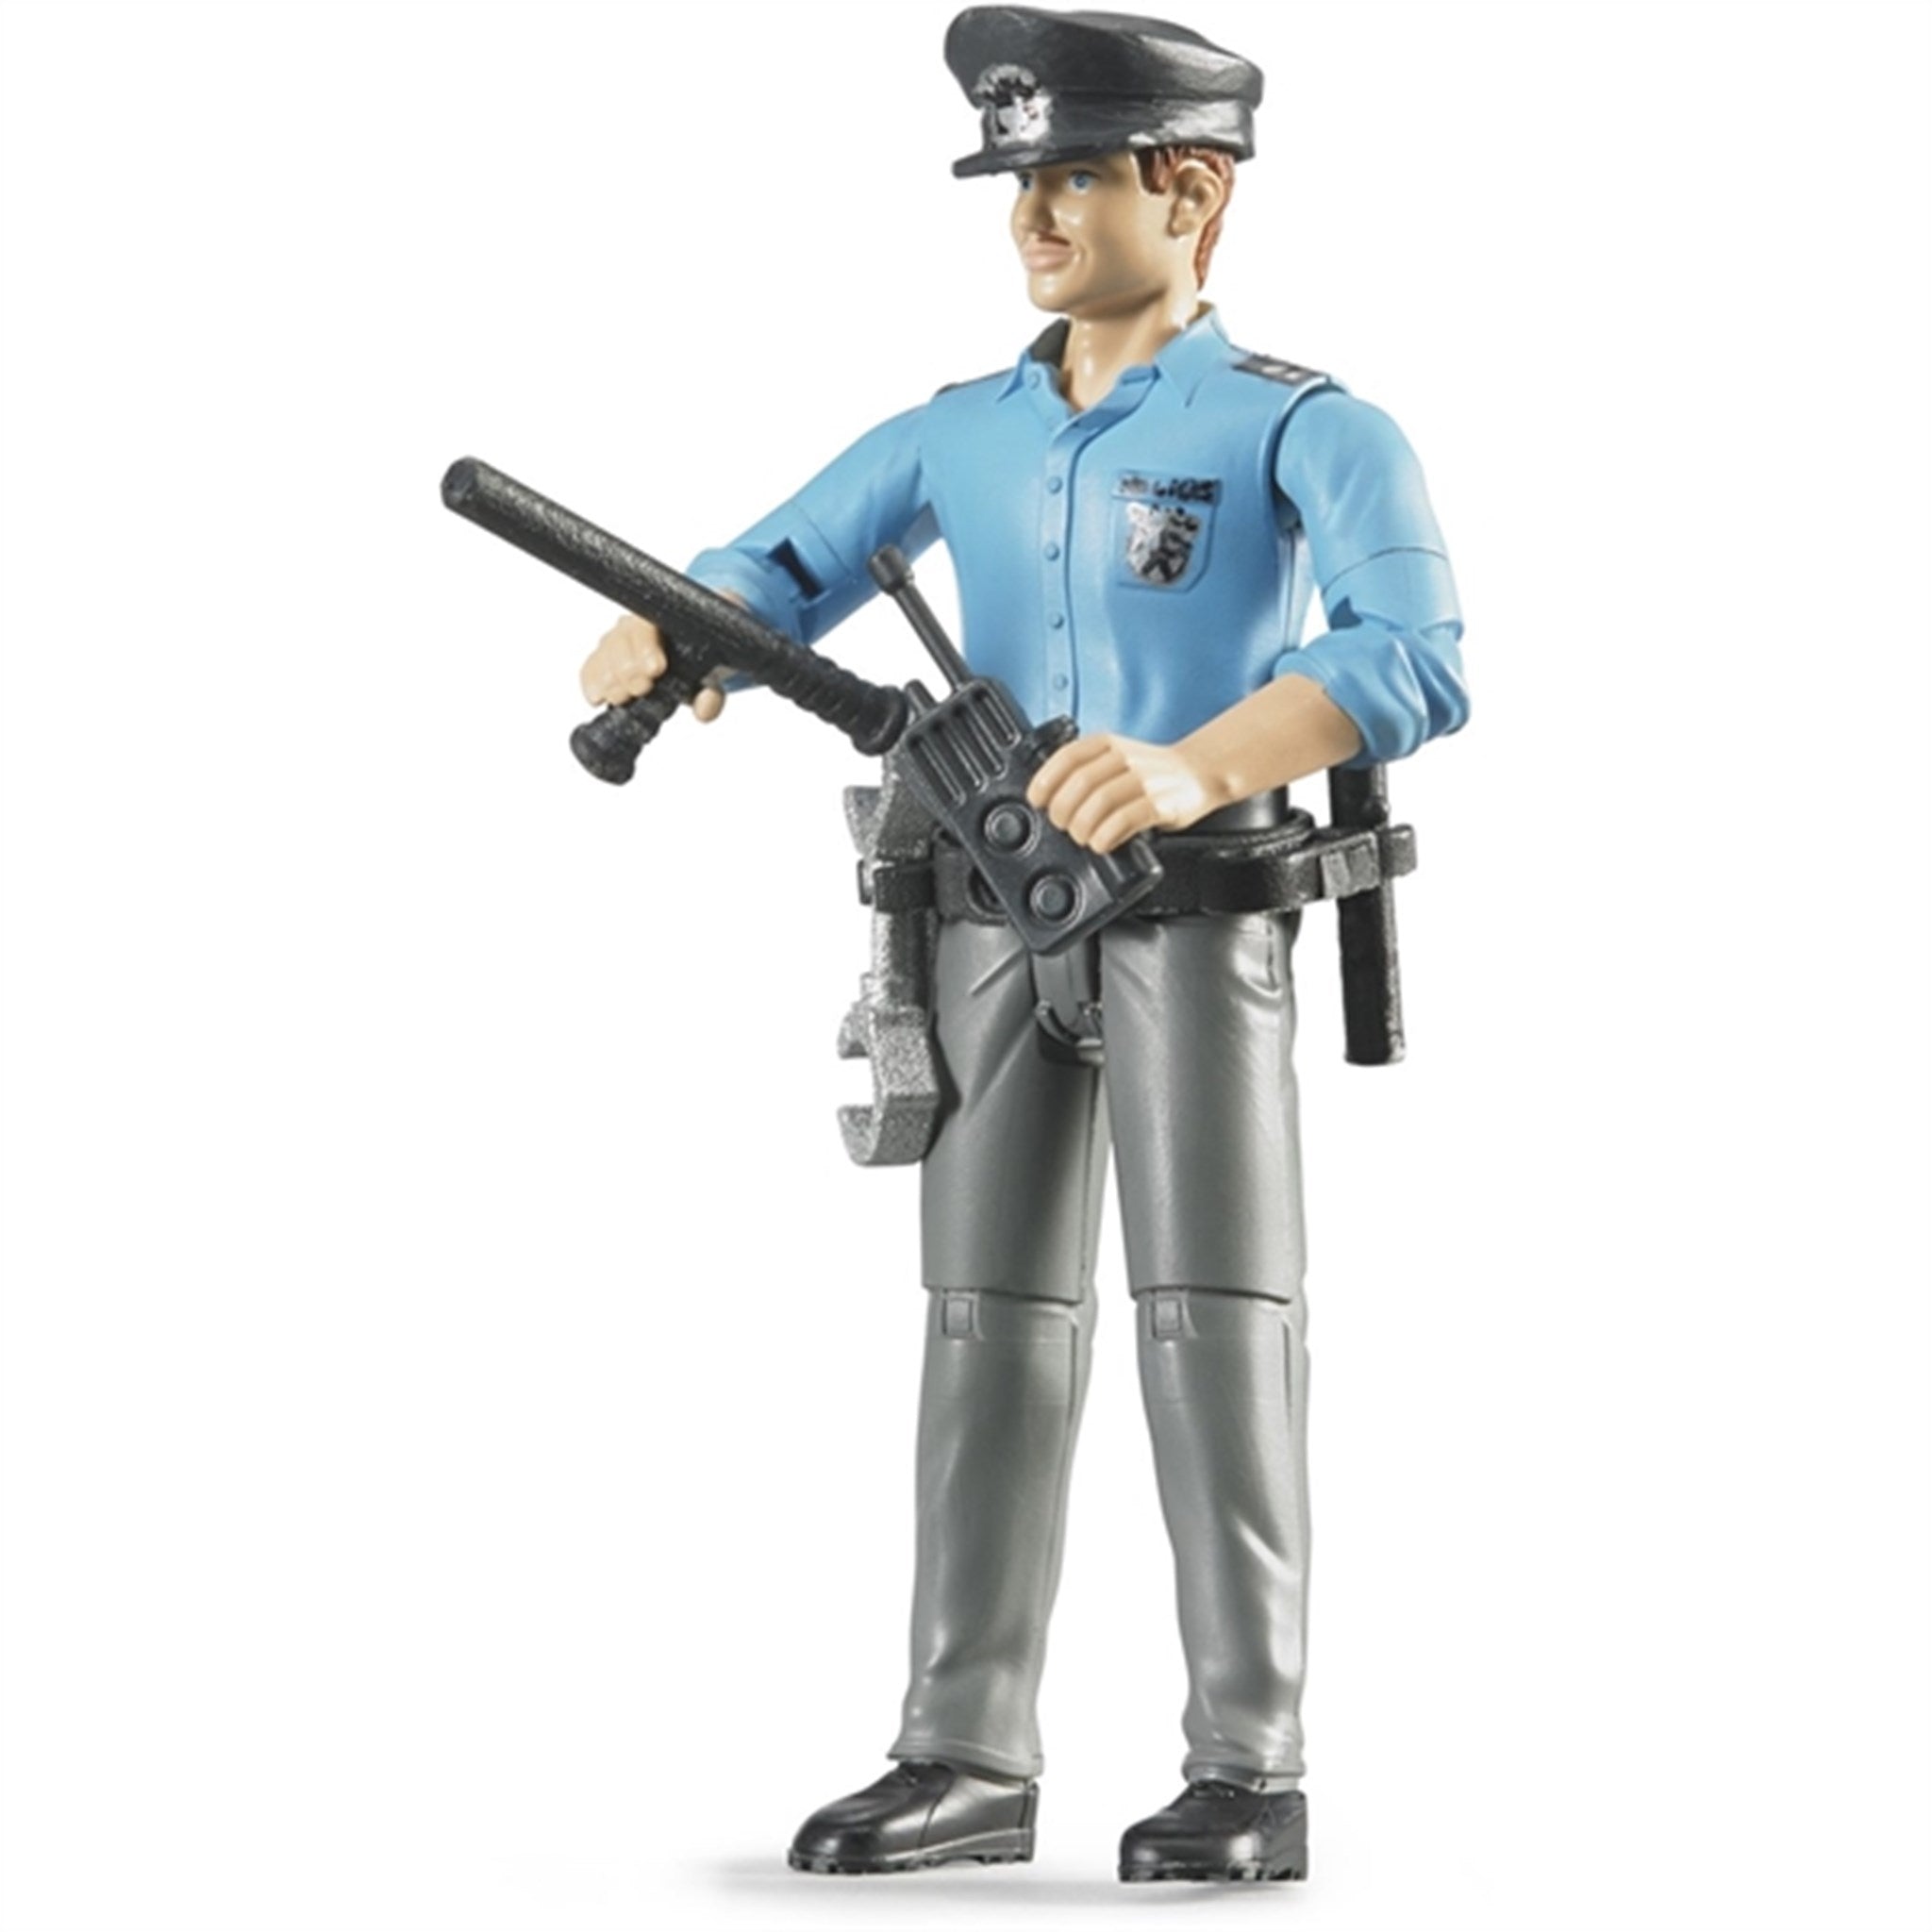 Bruder Policeman with Accessories 2